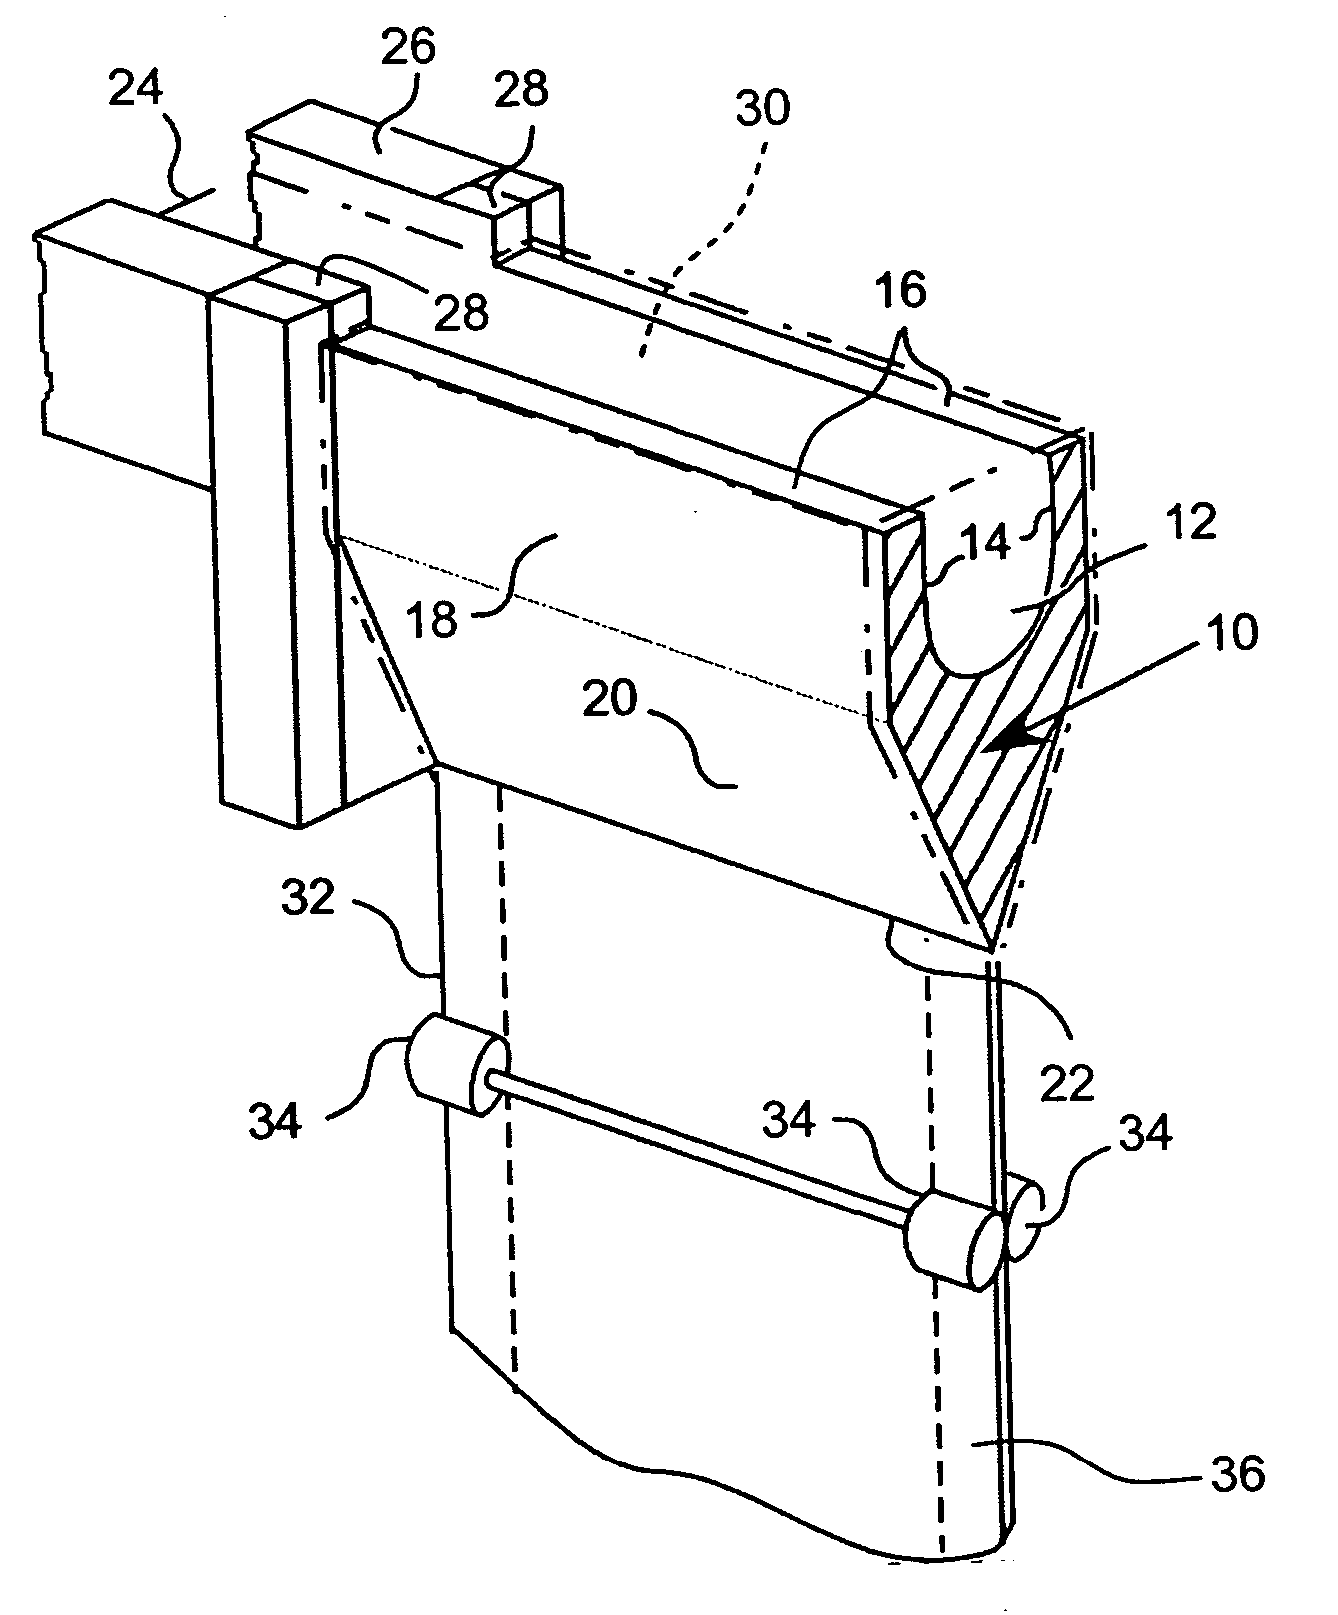 Method and apparatus for drawing a low liquidus viscosity glass